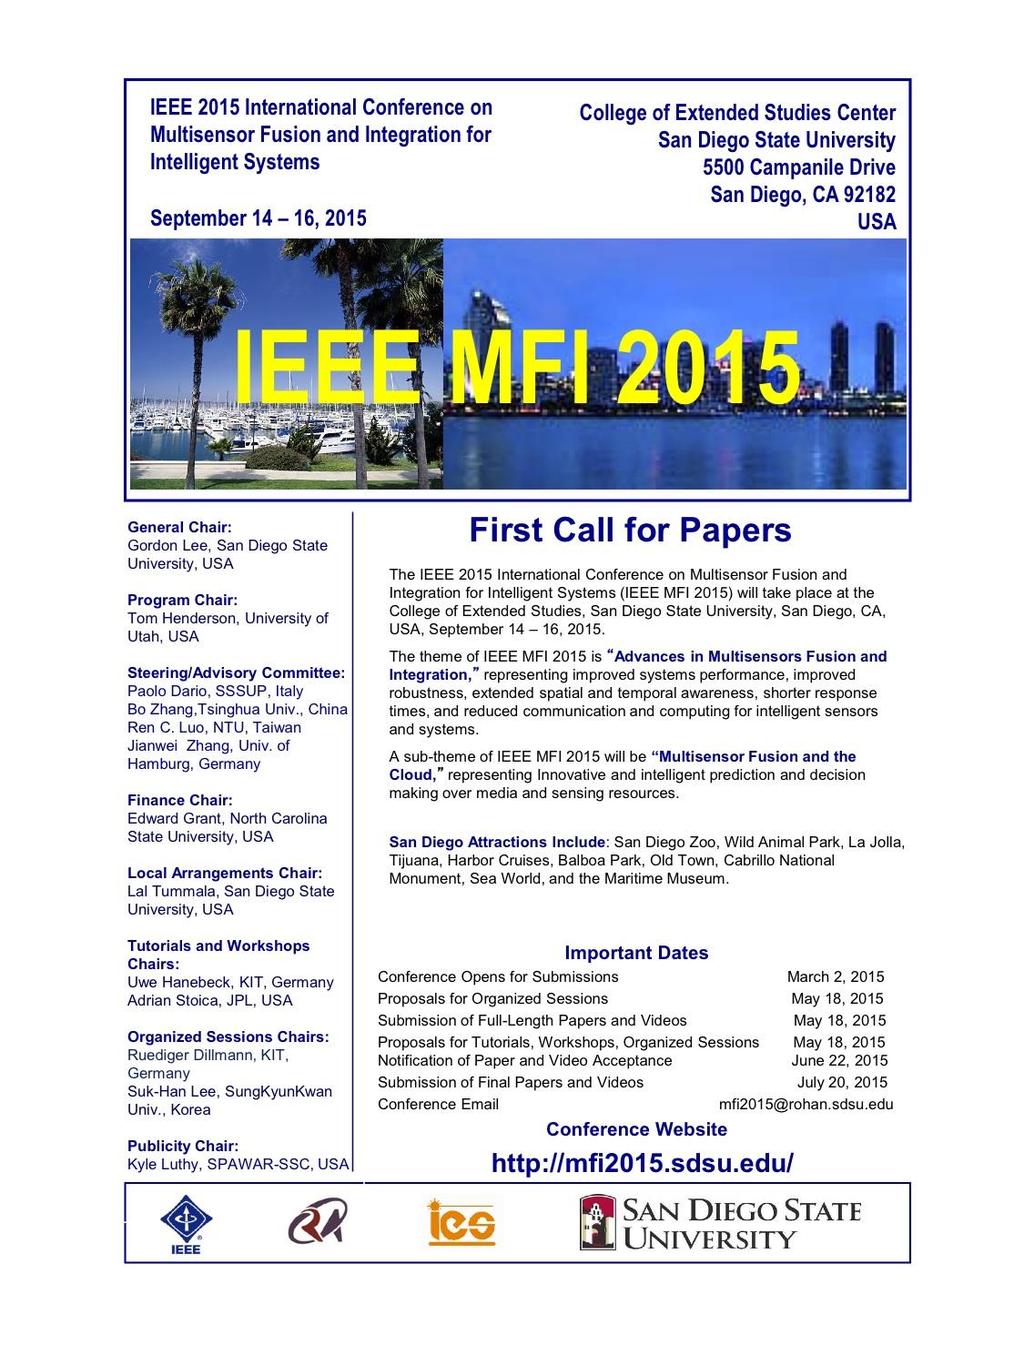 IEEE MFI 2015 San Diego Special Session: